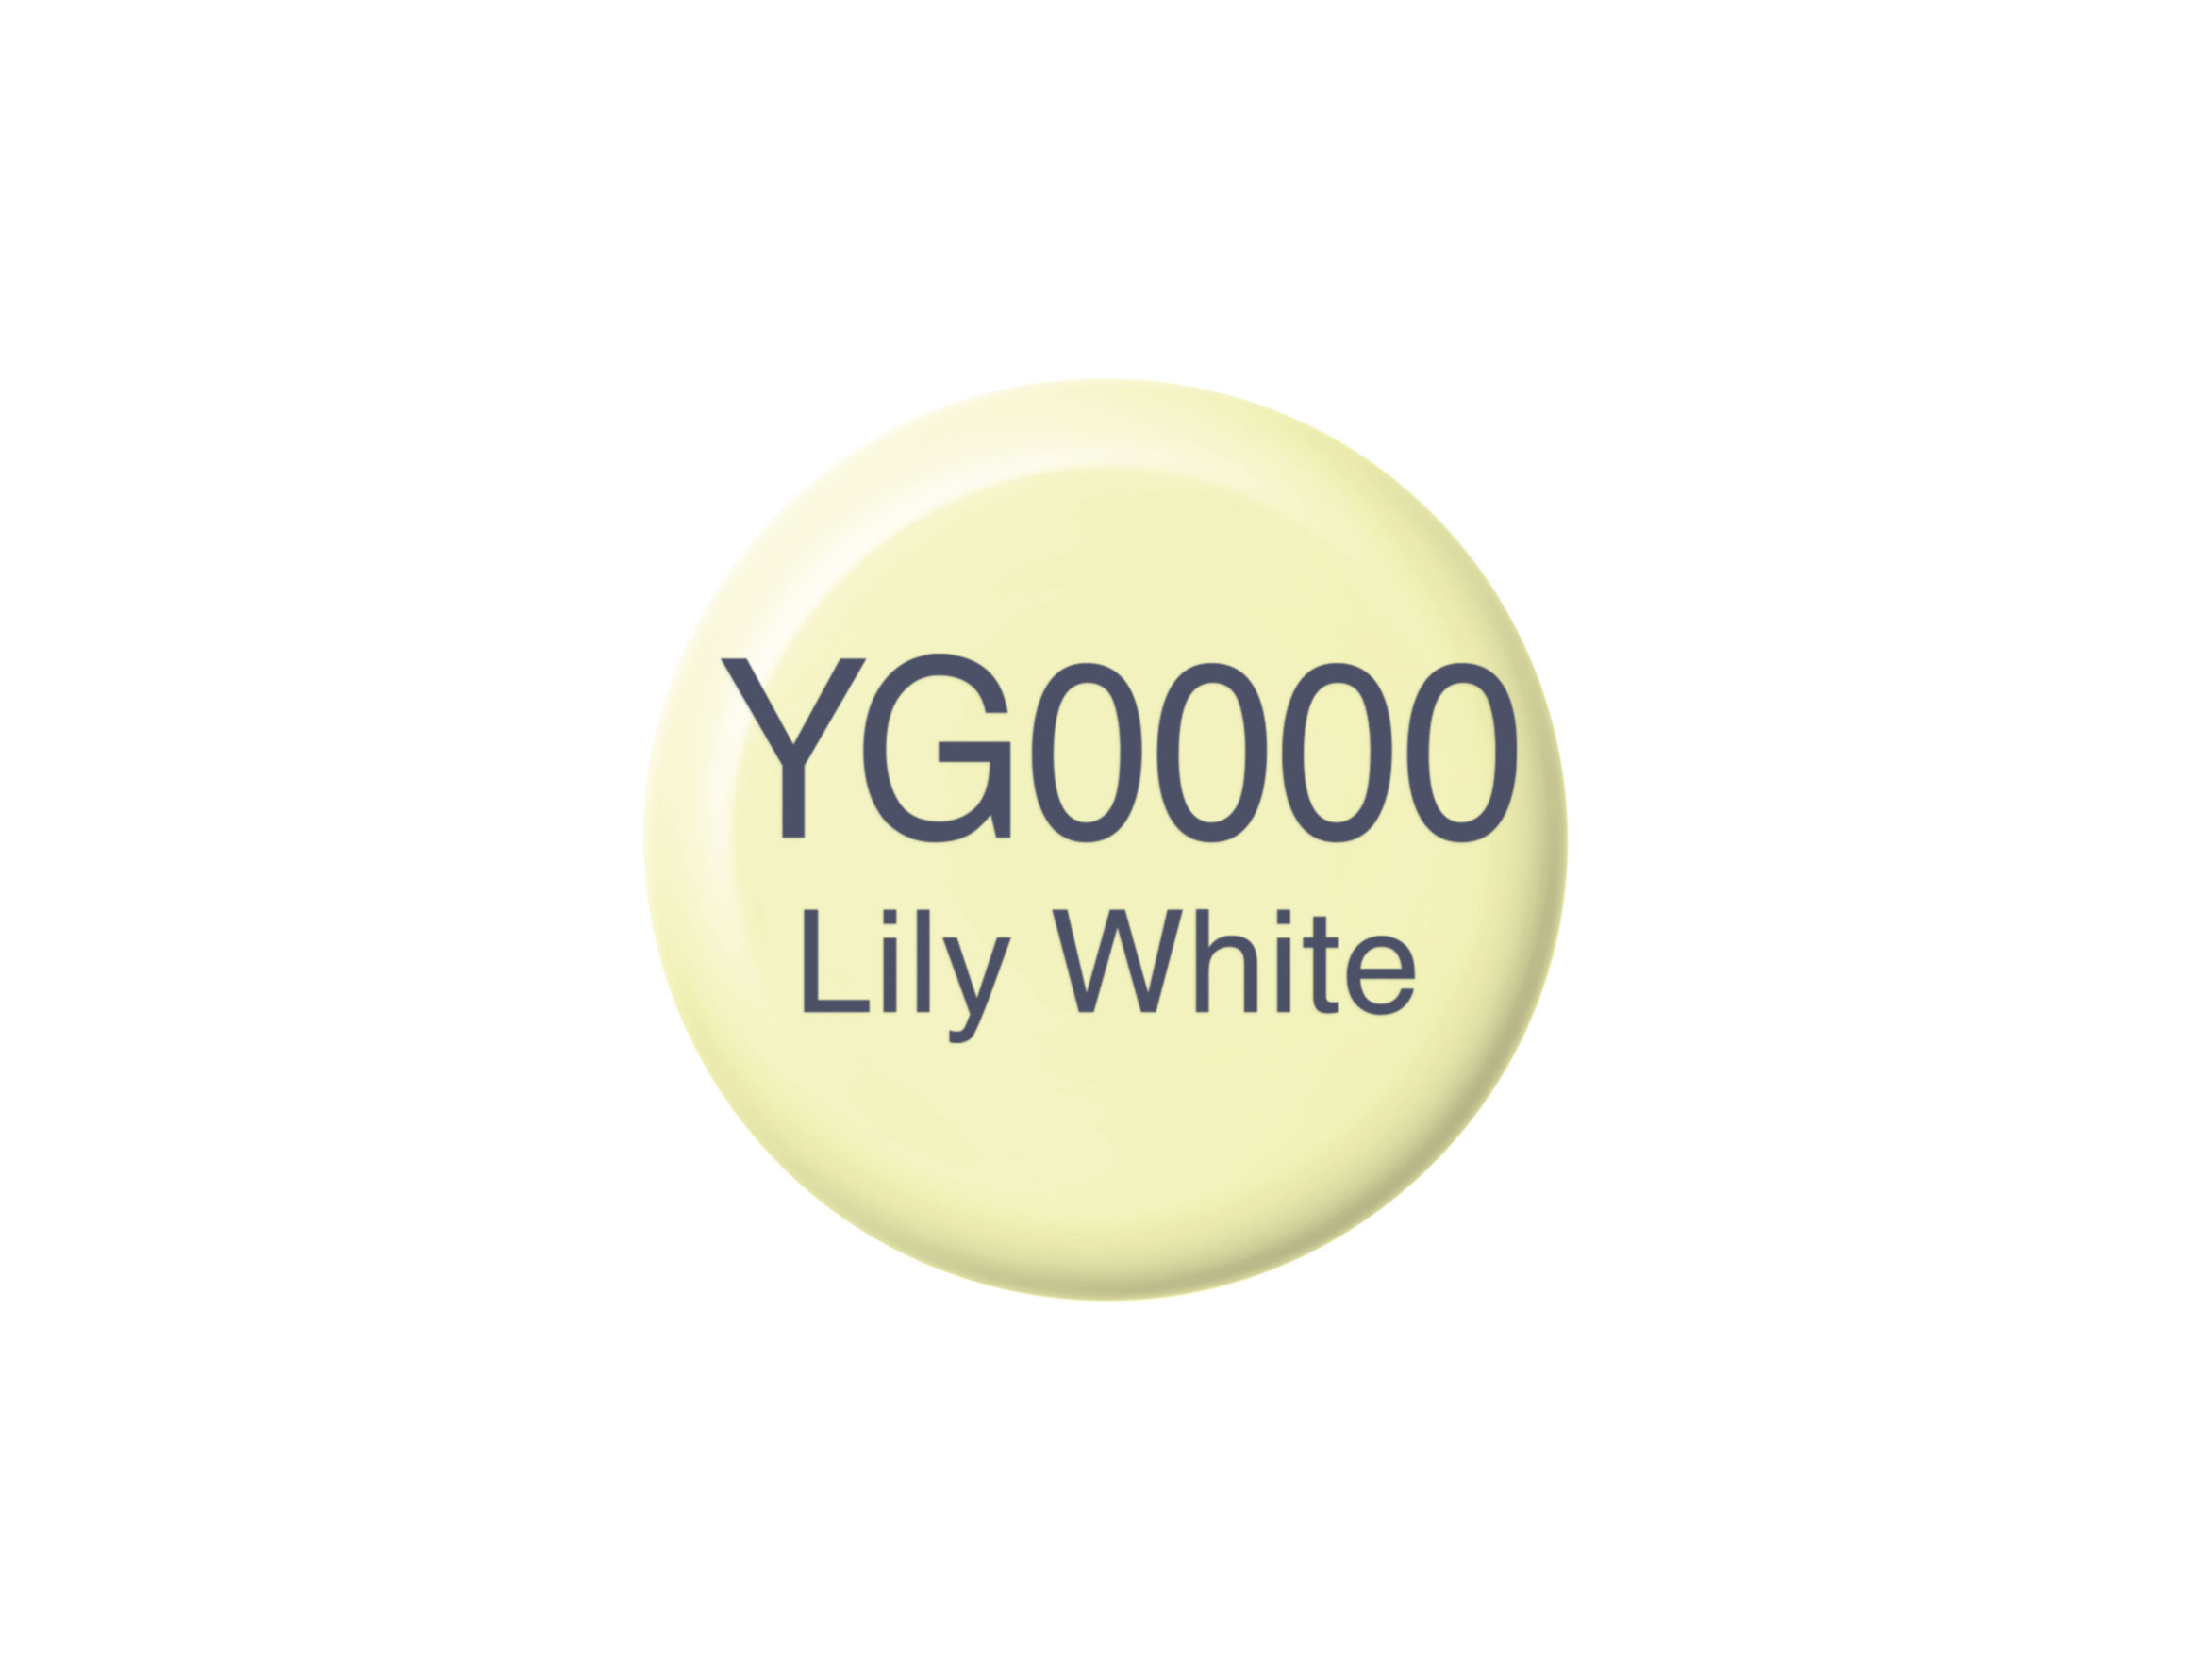 Copic Ink YG0000 Lily White